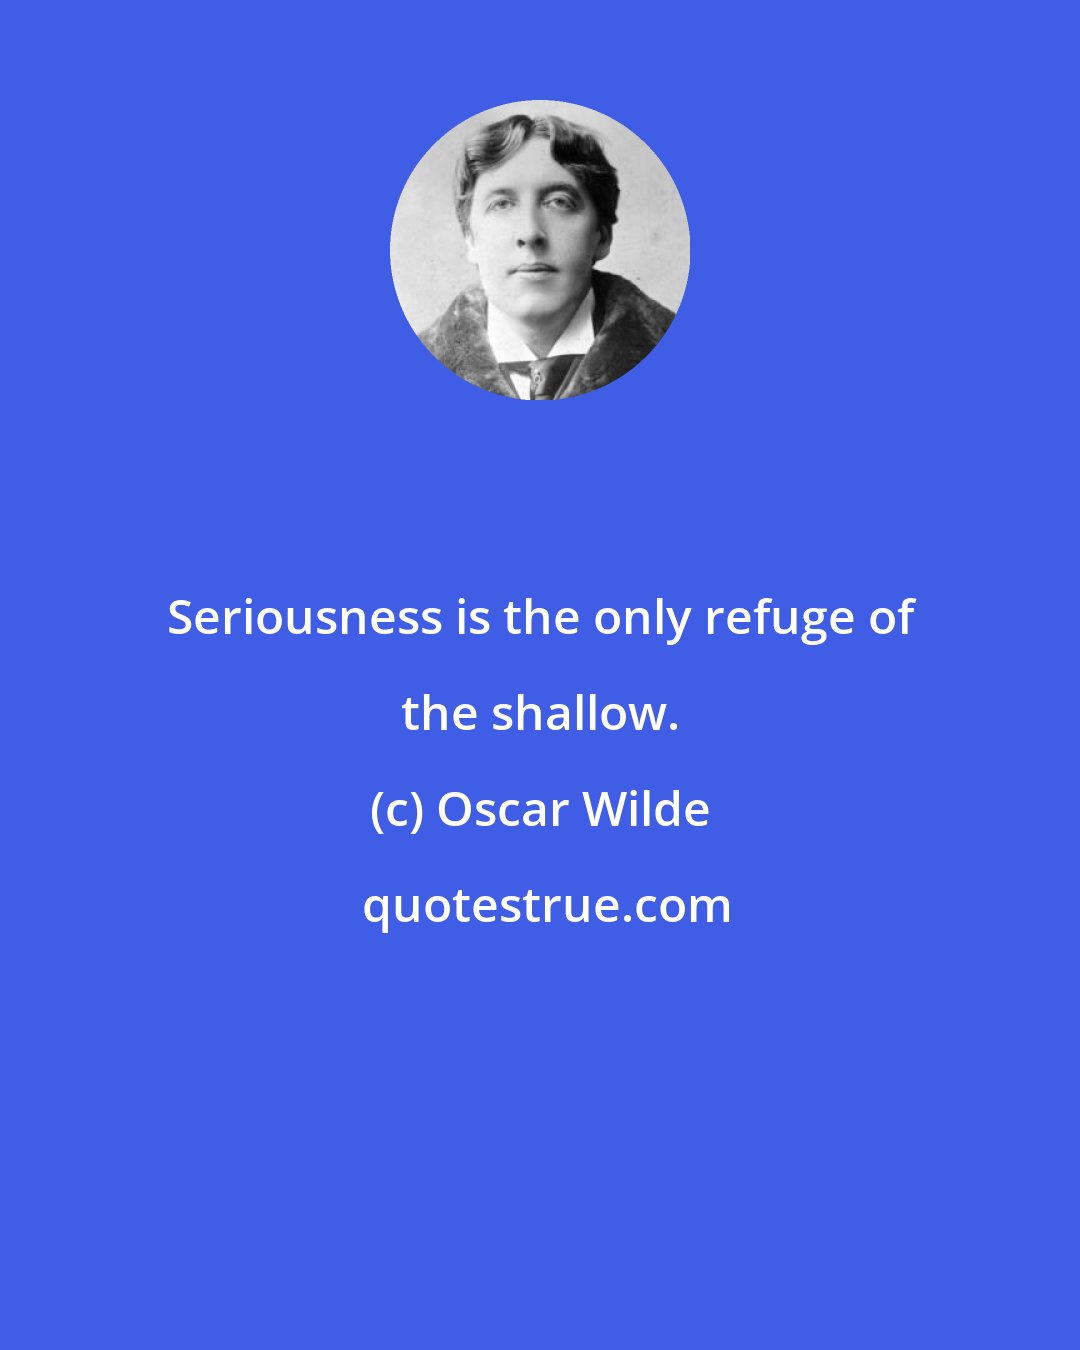 Oscar Wilde: Seriousness is the only refuge of the shallow.